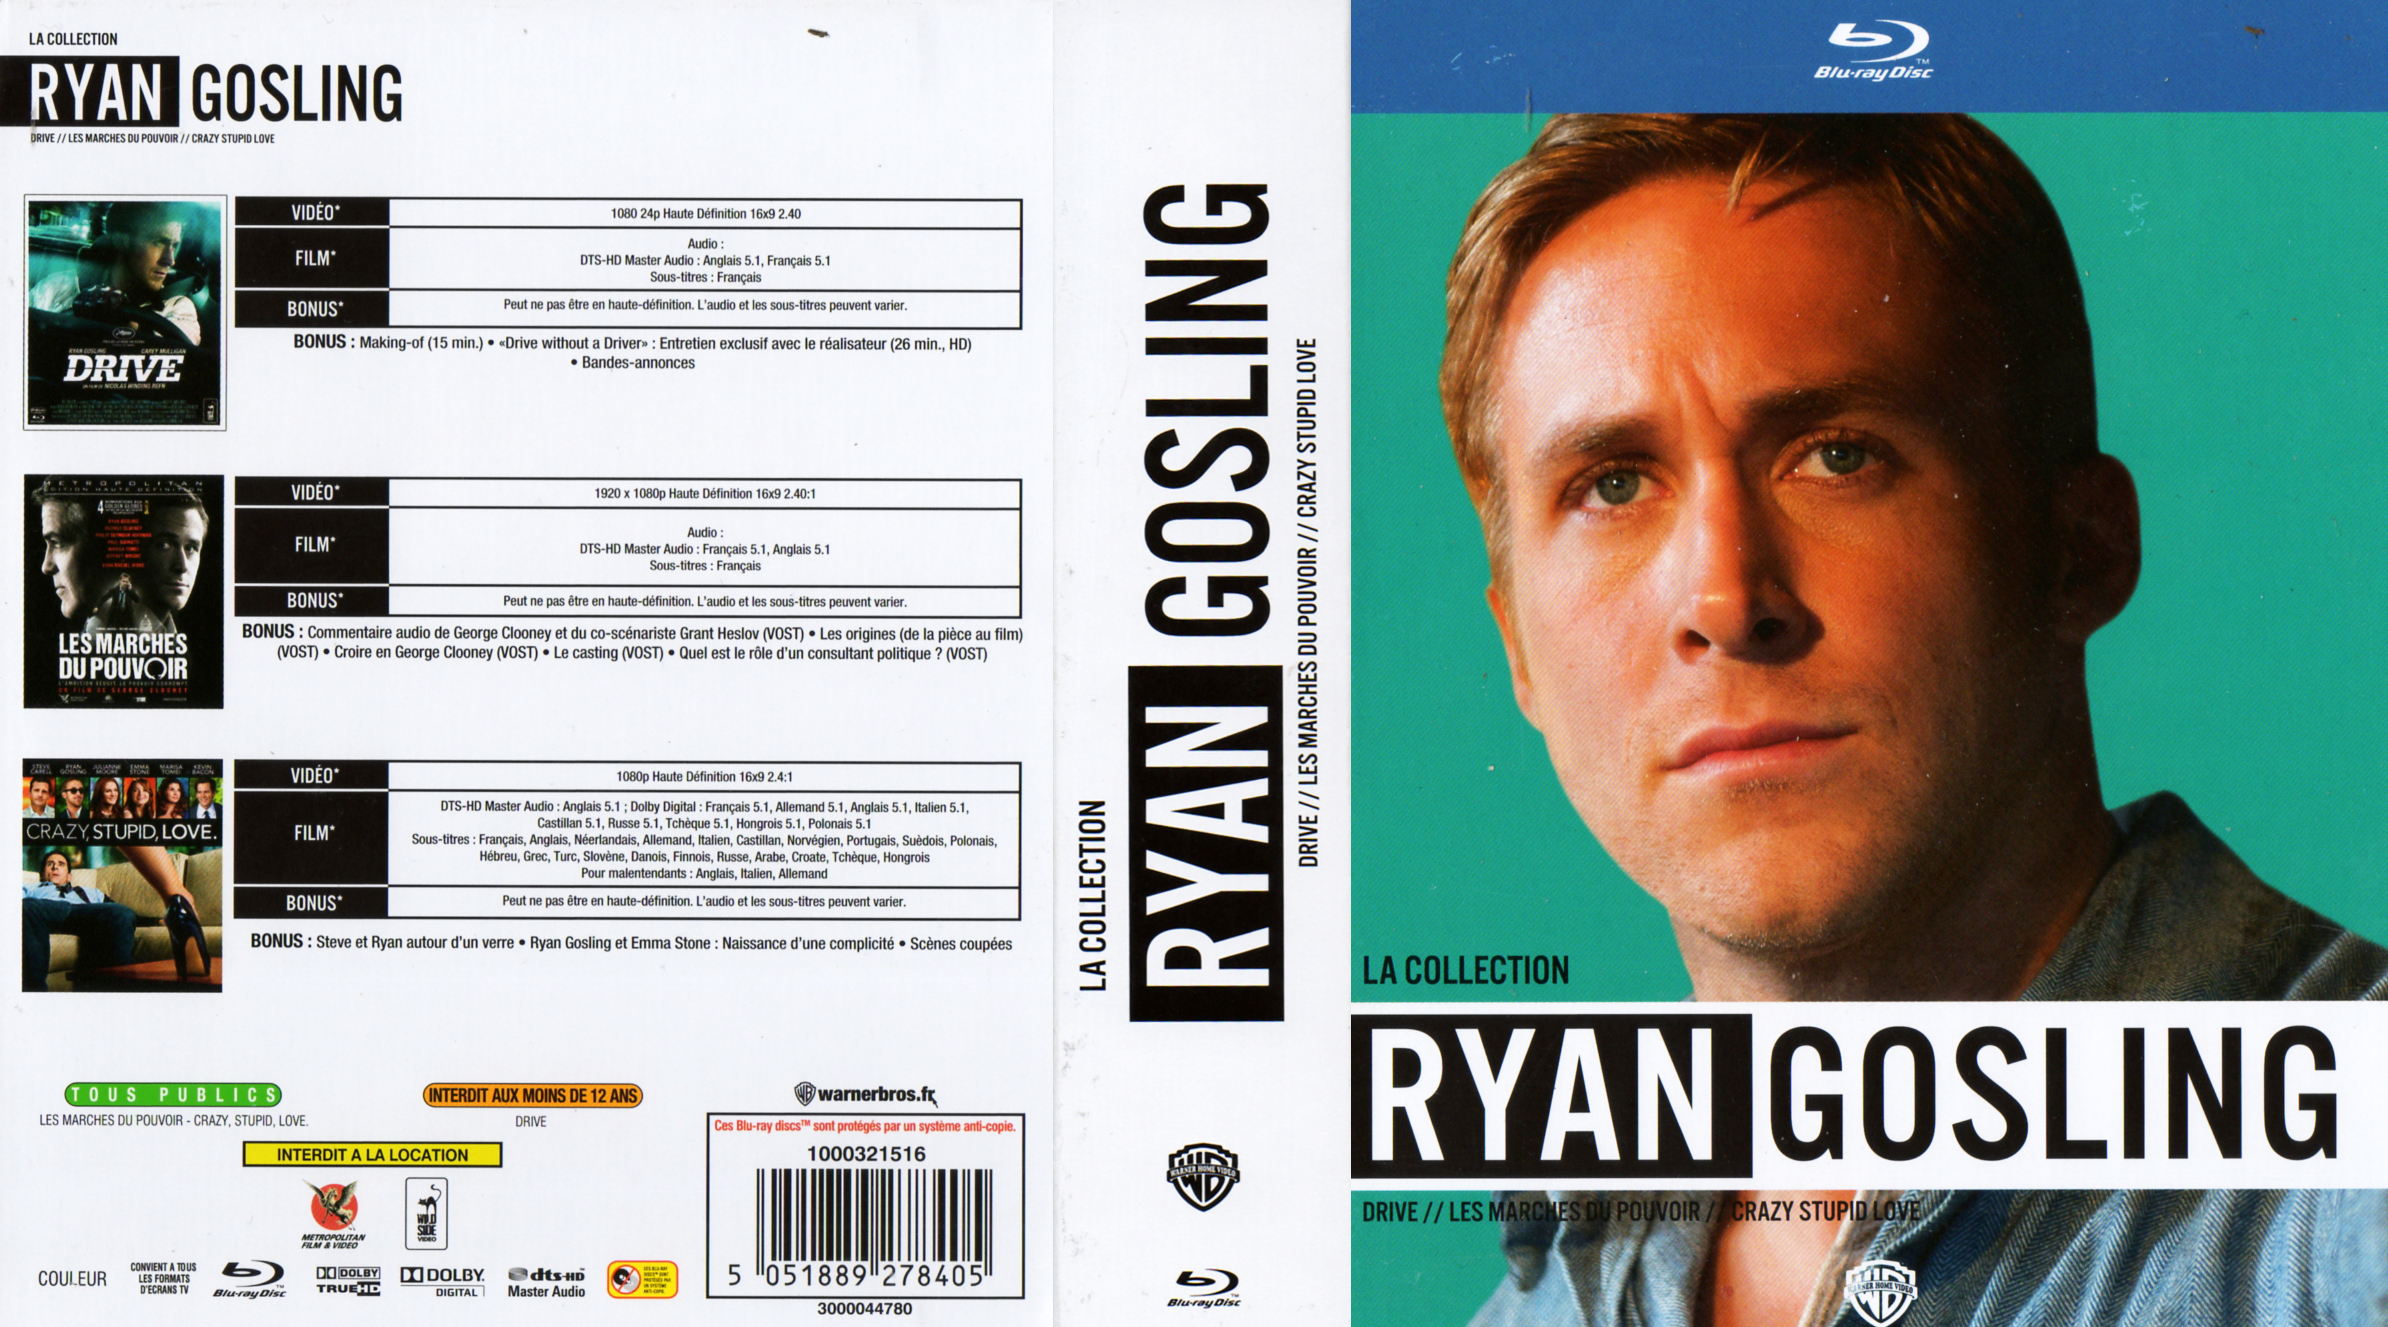 Jaquette DVD La collection Ryan Gosling (BLU-RAY)